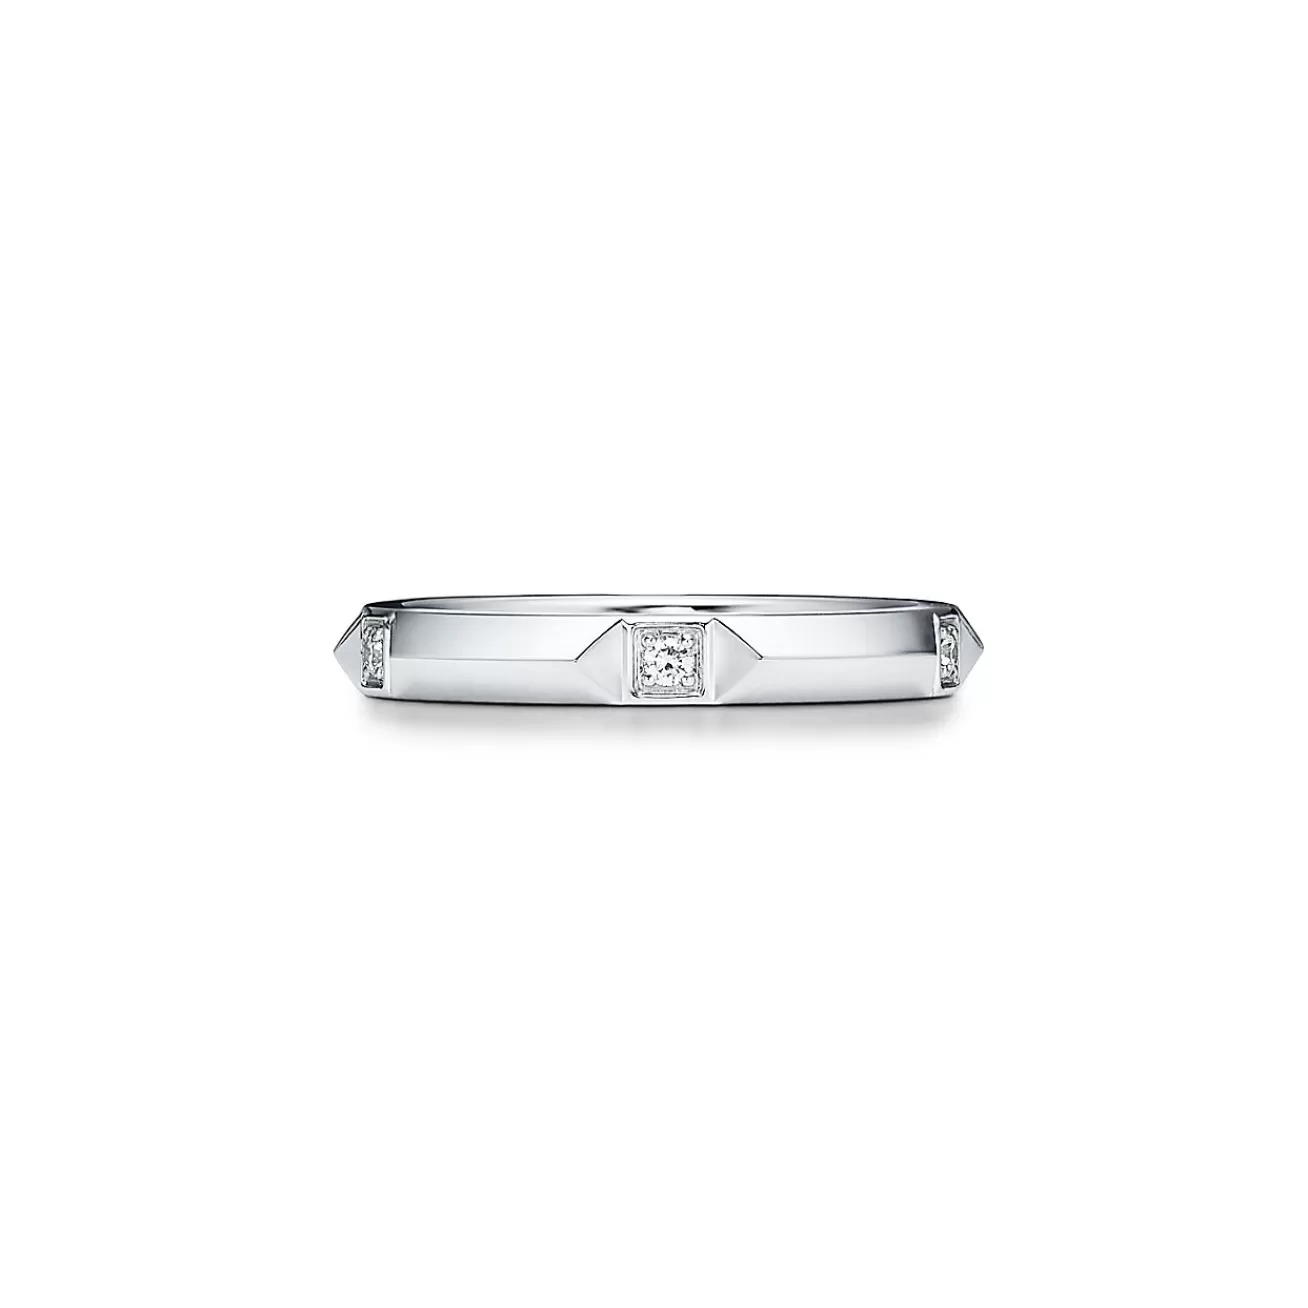 Tiffany & Co. Tiffany True® band ring in platinum with diamonds, 2.5 mm wide. | ^Women Rings | Men's Jewelry